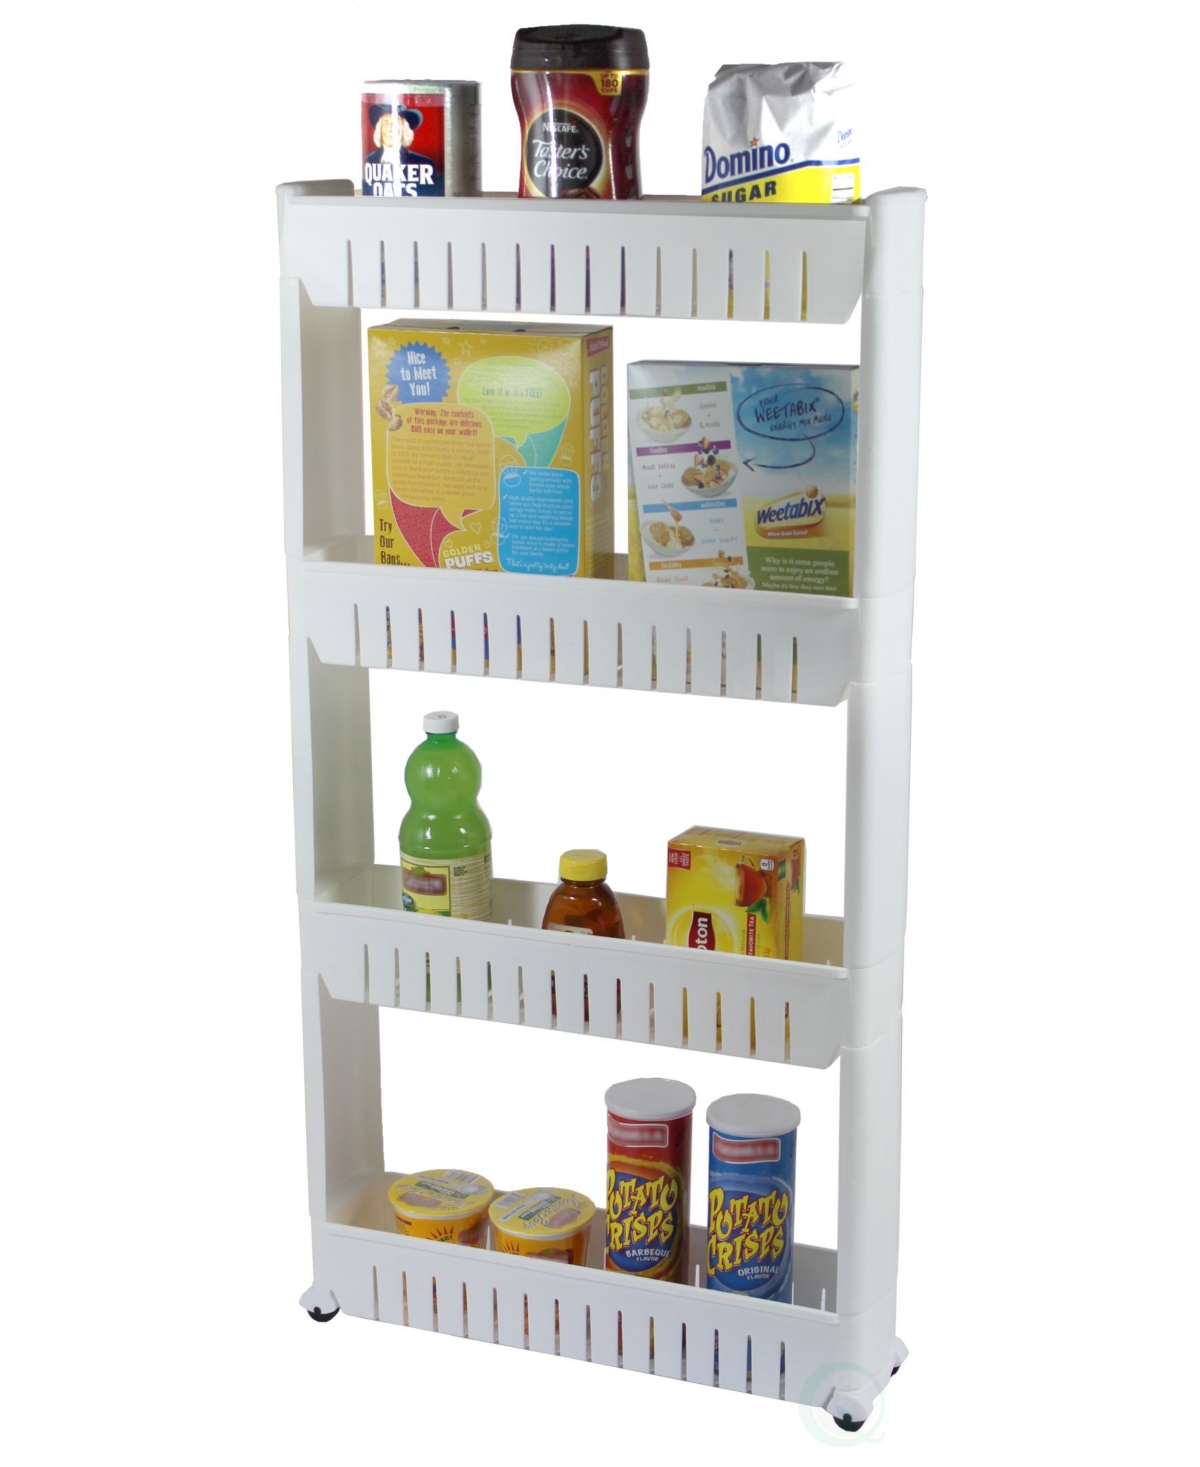 Vintiquewise Slim Storage Cabinet Organizer 4 Shelf Rolling Pull Out Cart Rack Tower with Wheels - White